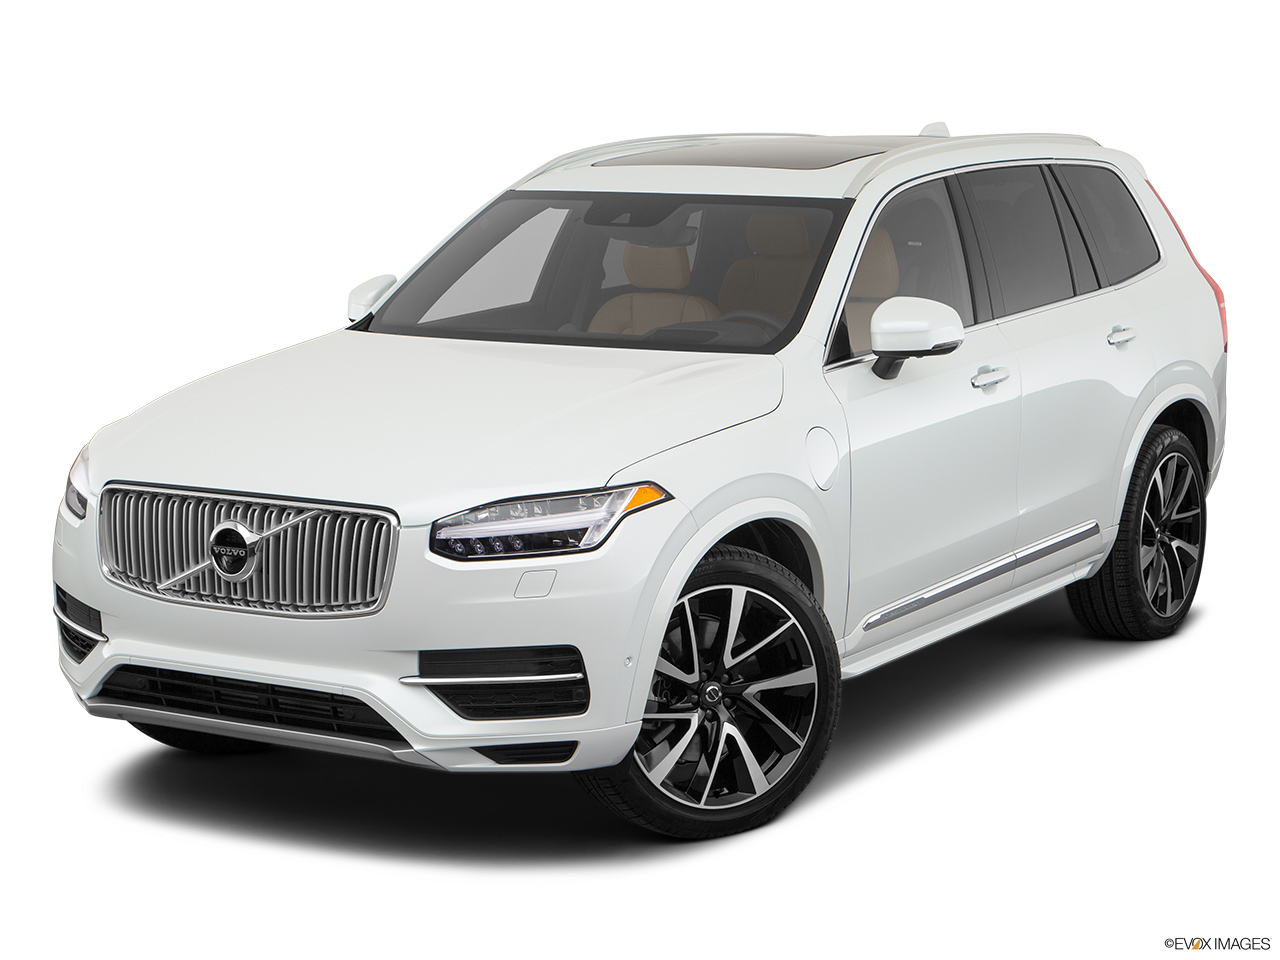 2019 Volvo XC90  T8 Inscription eAWD Plug-in Hybrid Front angle view. 